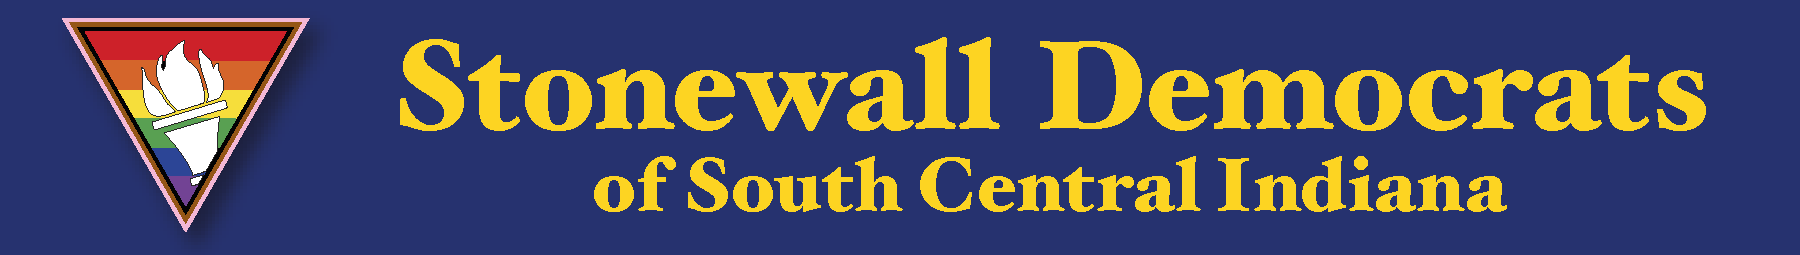 Stonewall Democrats of South Central Indiana